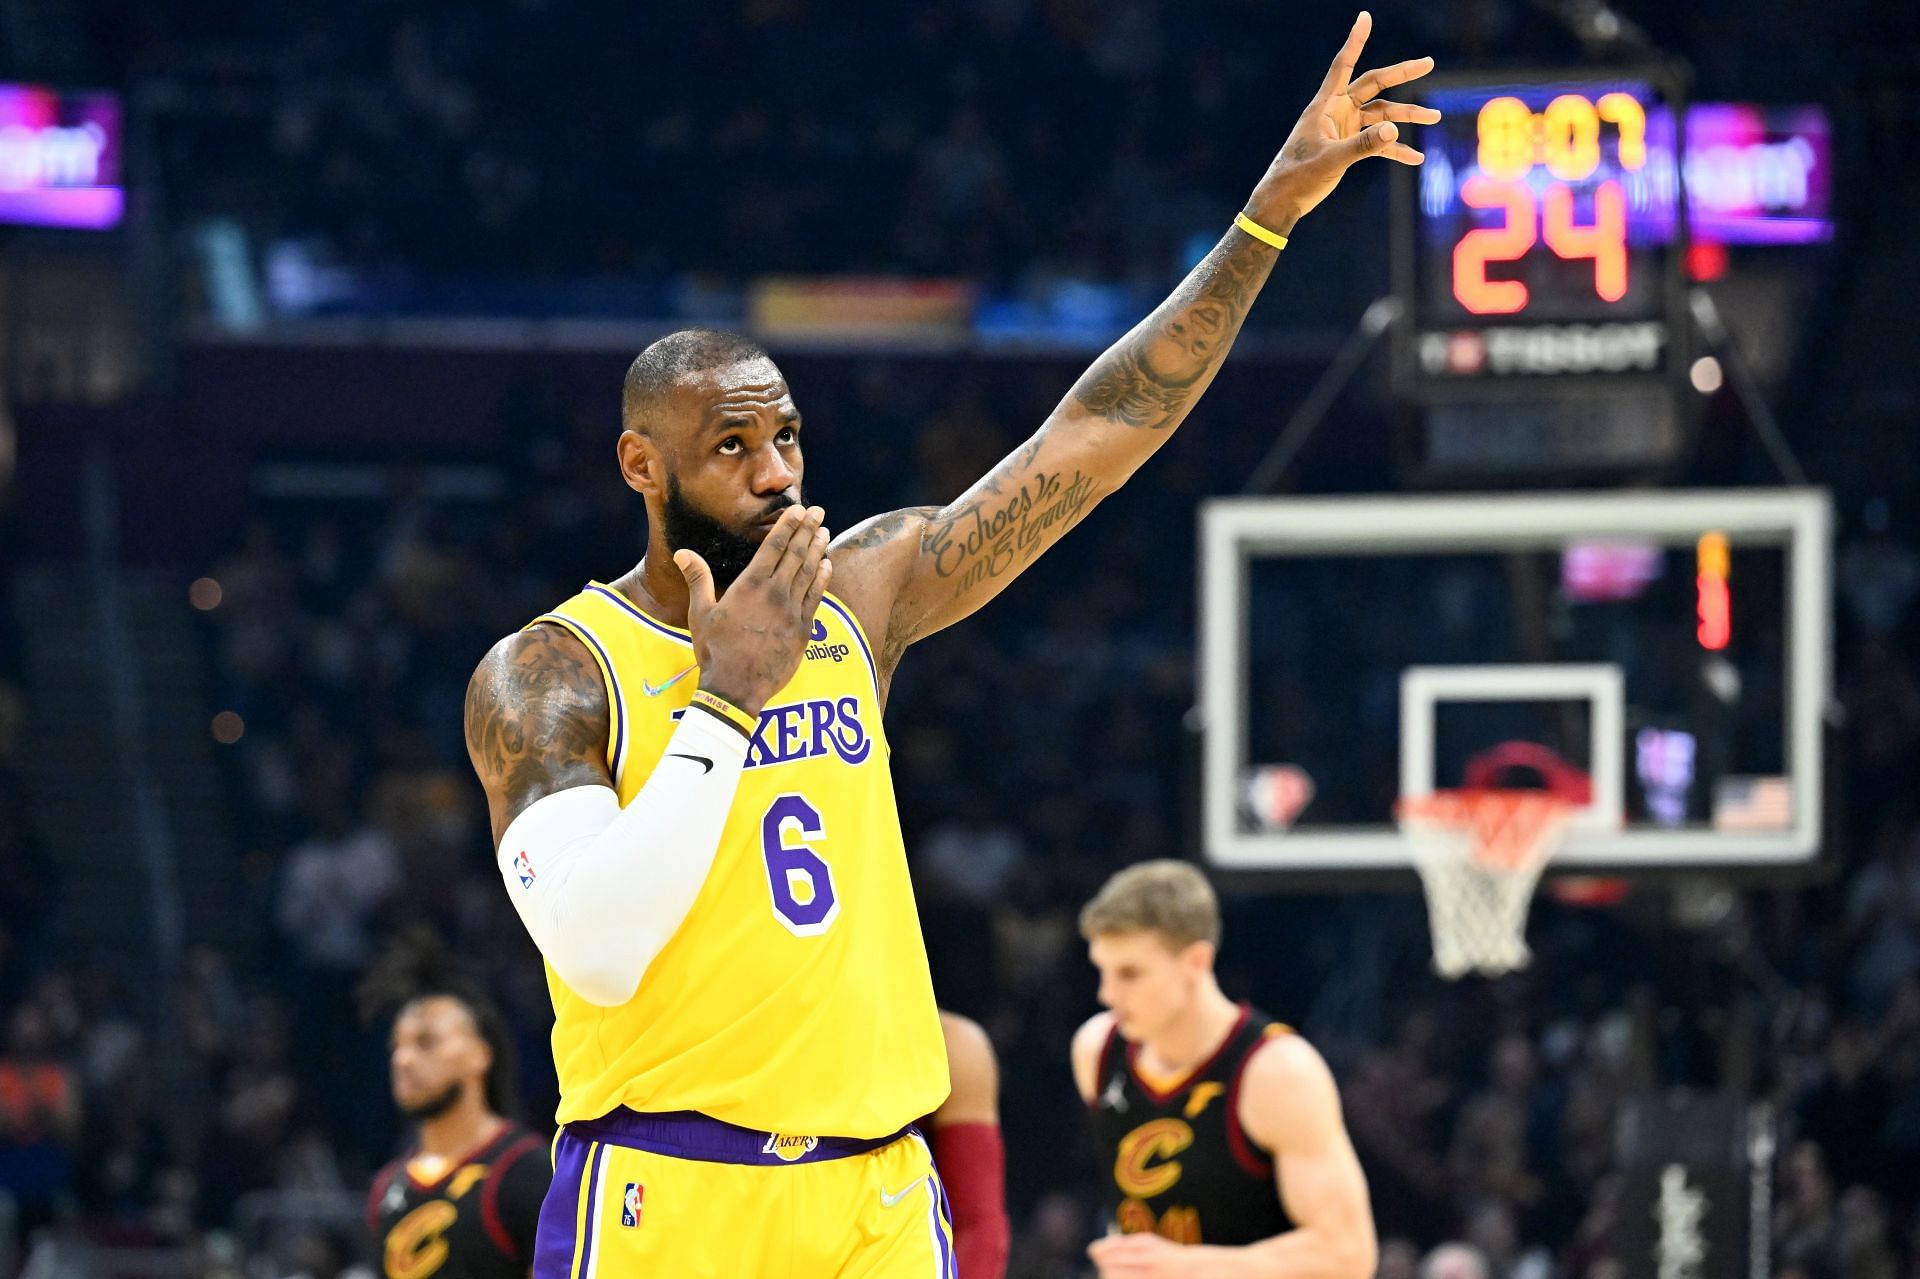 LeBron James #6 of the Los Angeles Lakers waves to the crowd during the first quarter against the Cleveland Cavaliers at Rocket Mortgage Fieldhouse on March 21, 2022 in Cleveland, Ohio.